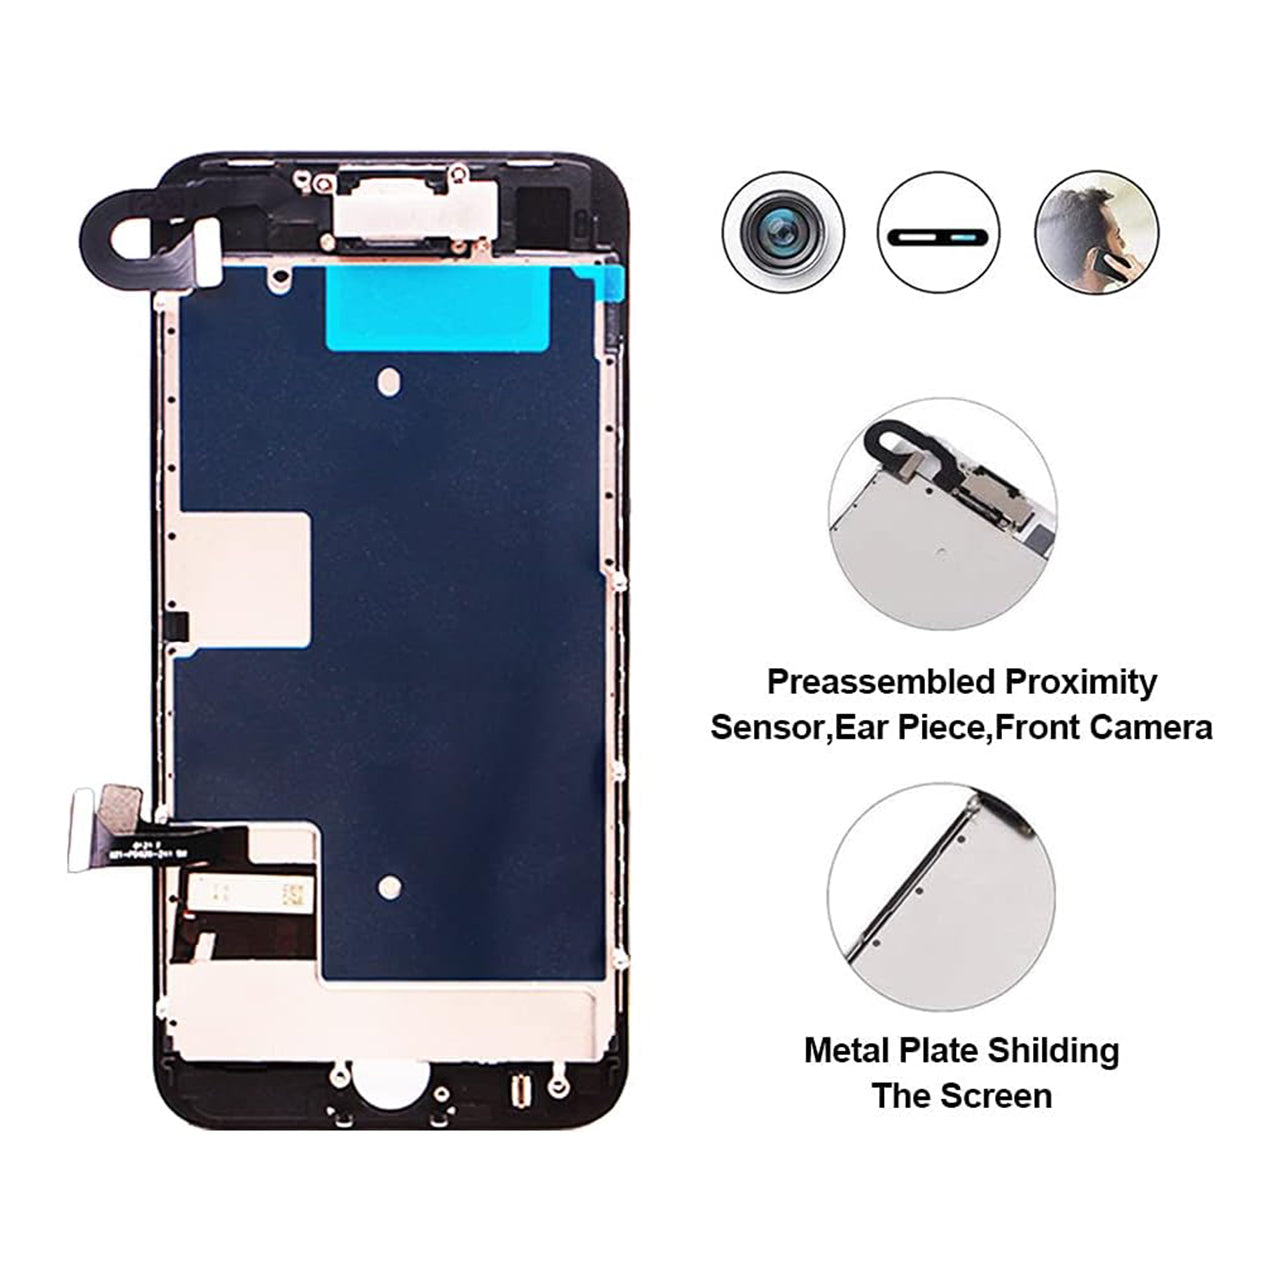 iPhone 8 reemplazo de pantalla LCD (A1863, A1905, A1906)  - iPhone 8 LCD Screen Replacement